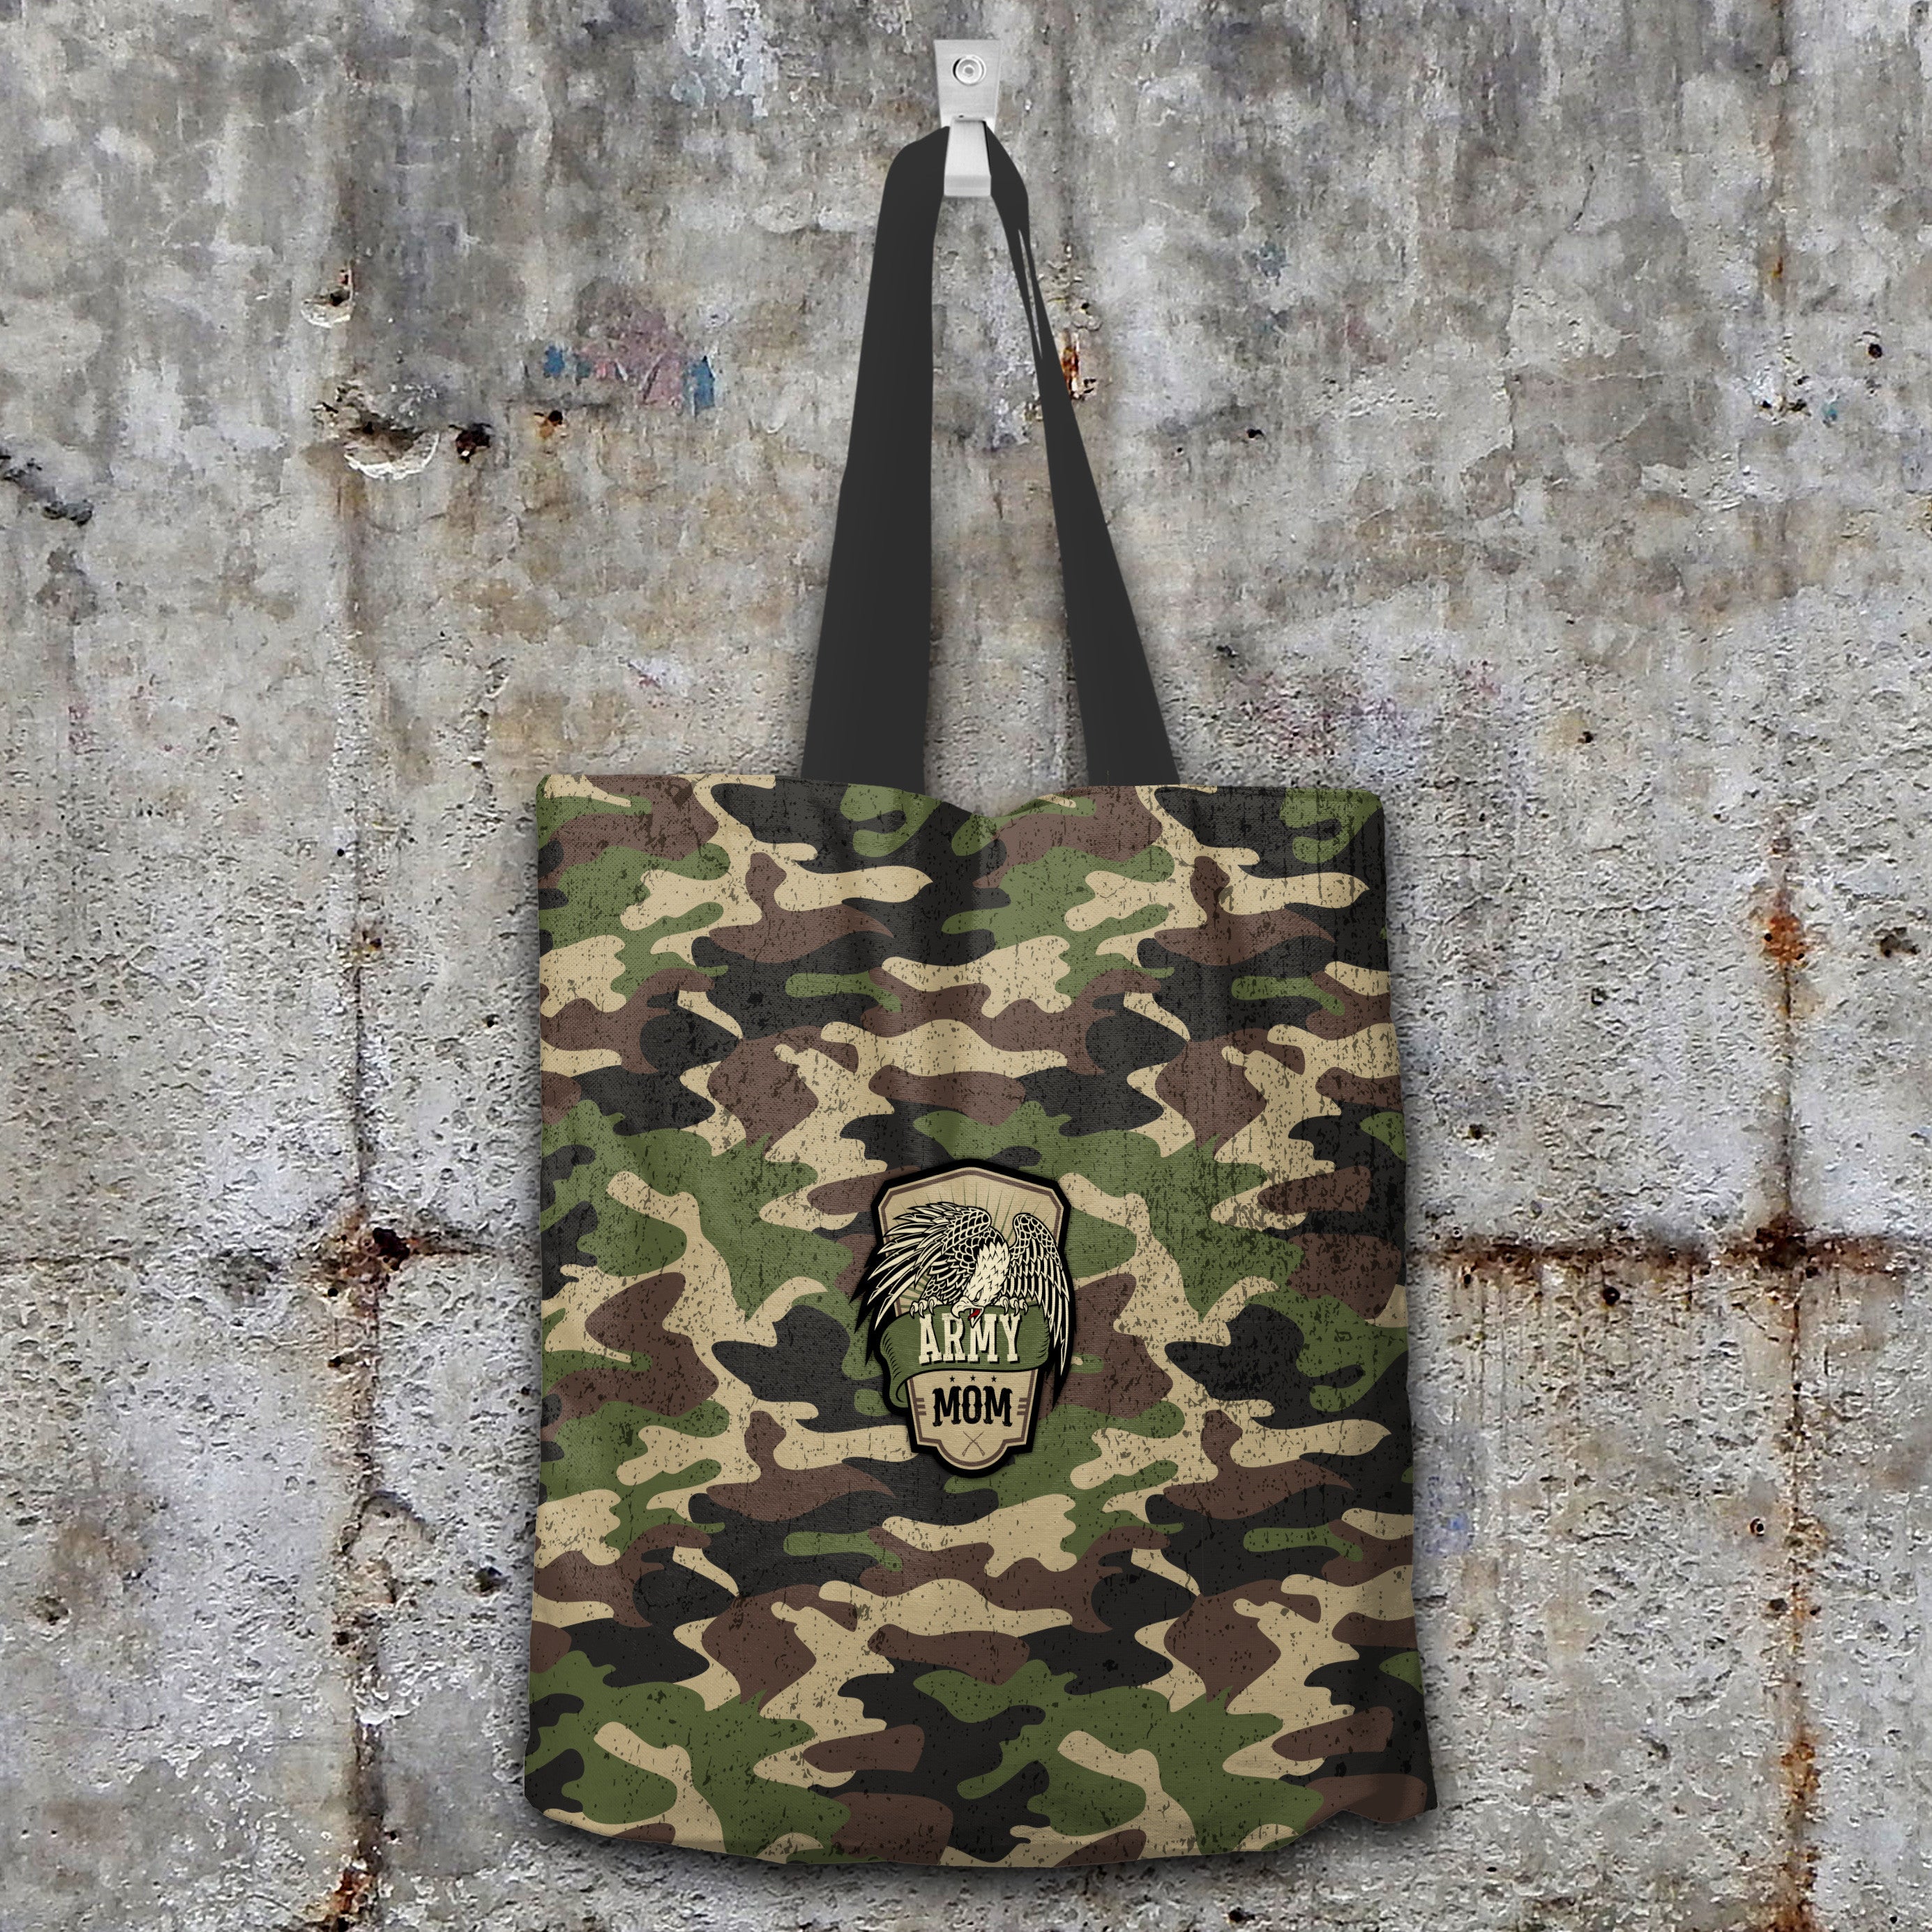 Army Mom Camouflage Tote Bag